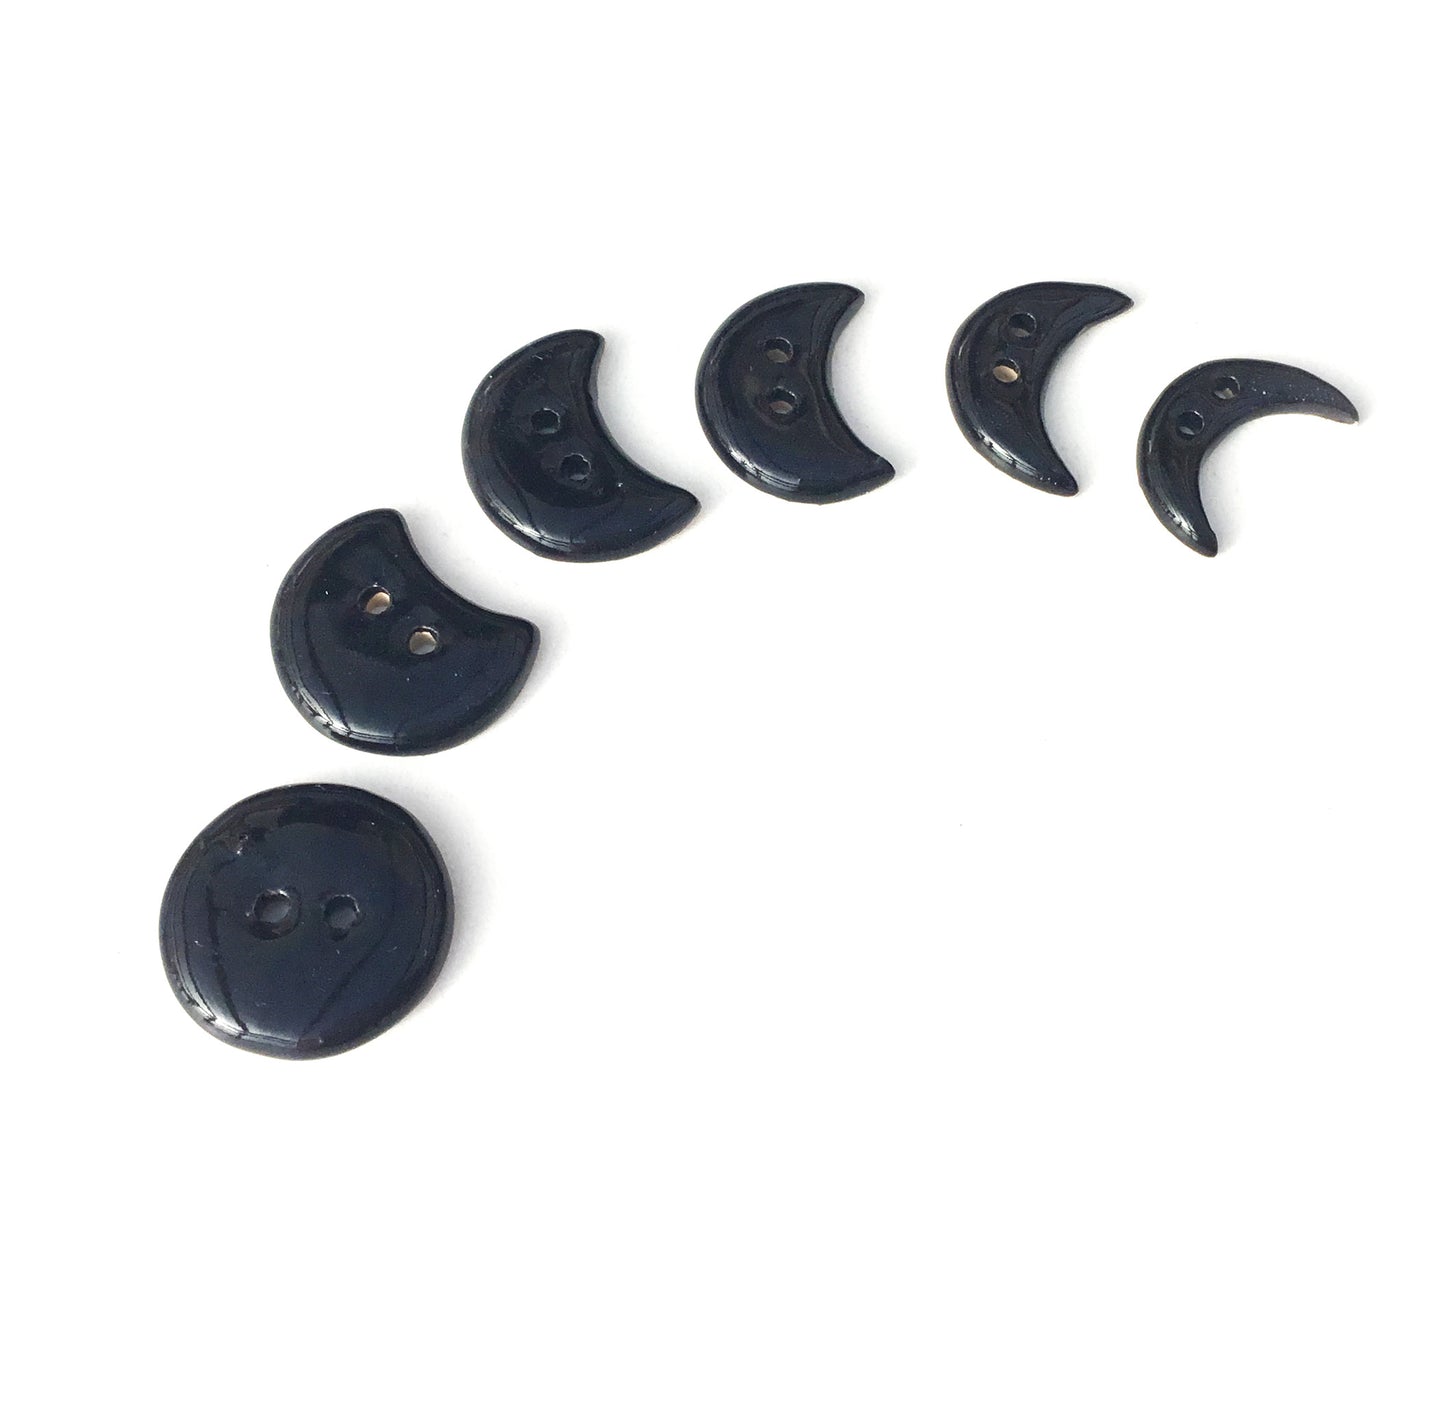 Black Moon Phase Ceramic Buttons - 3/4" - 6 Pack